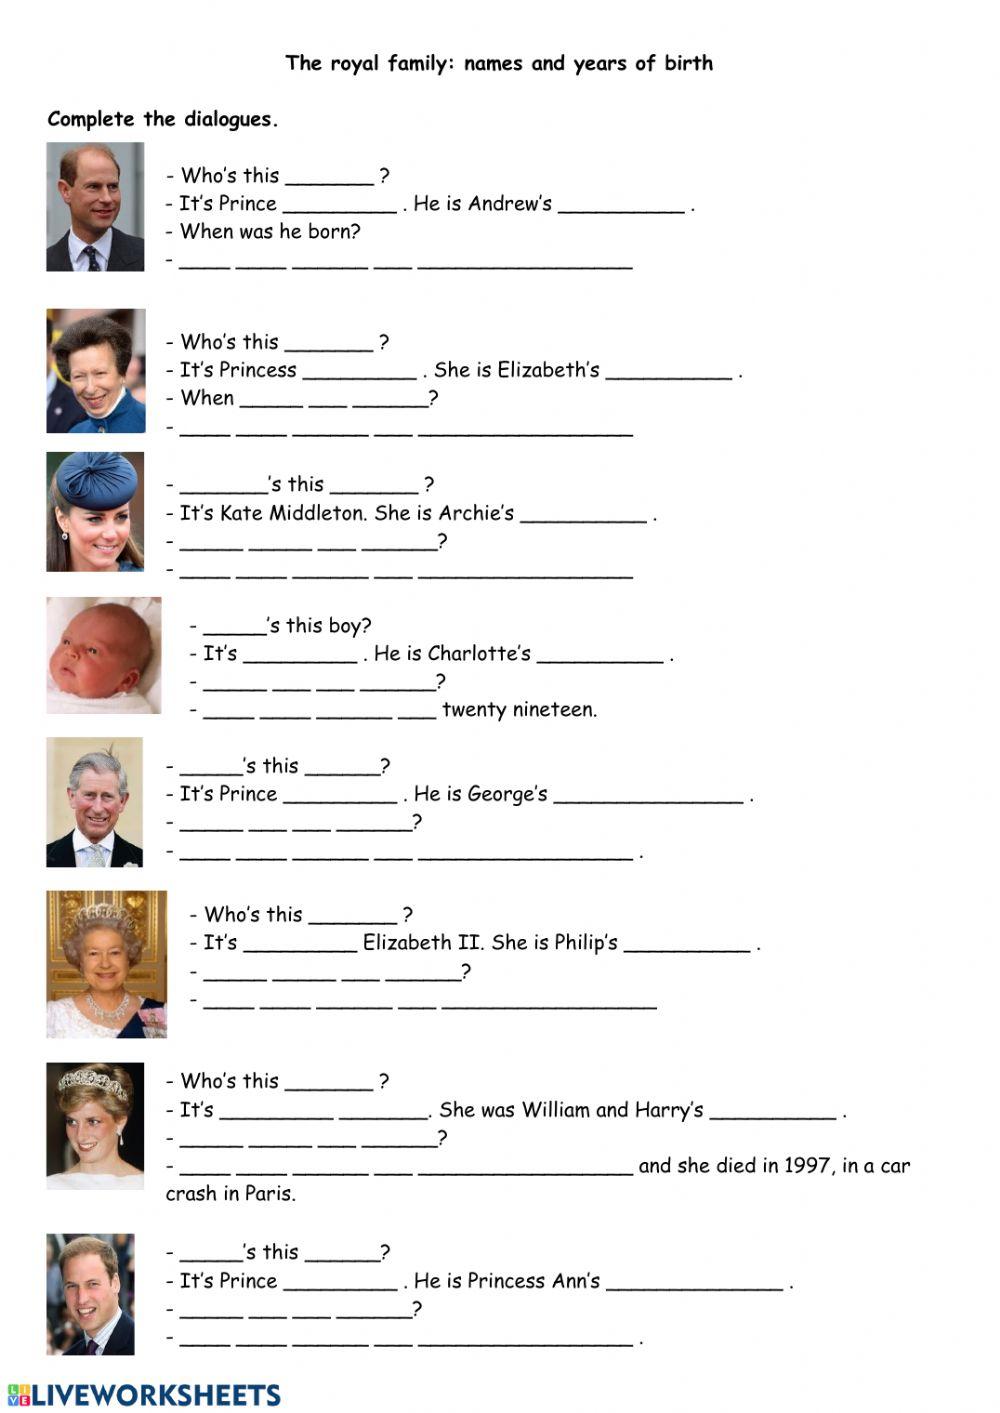 Royal family: names and years of birth